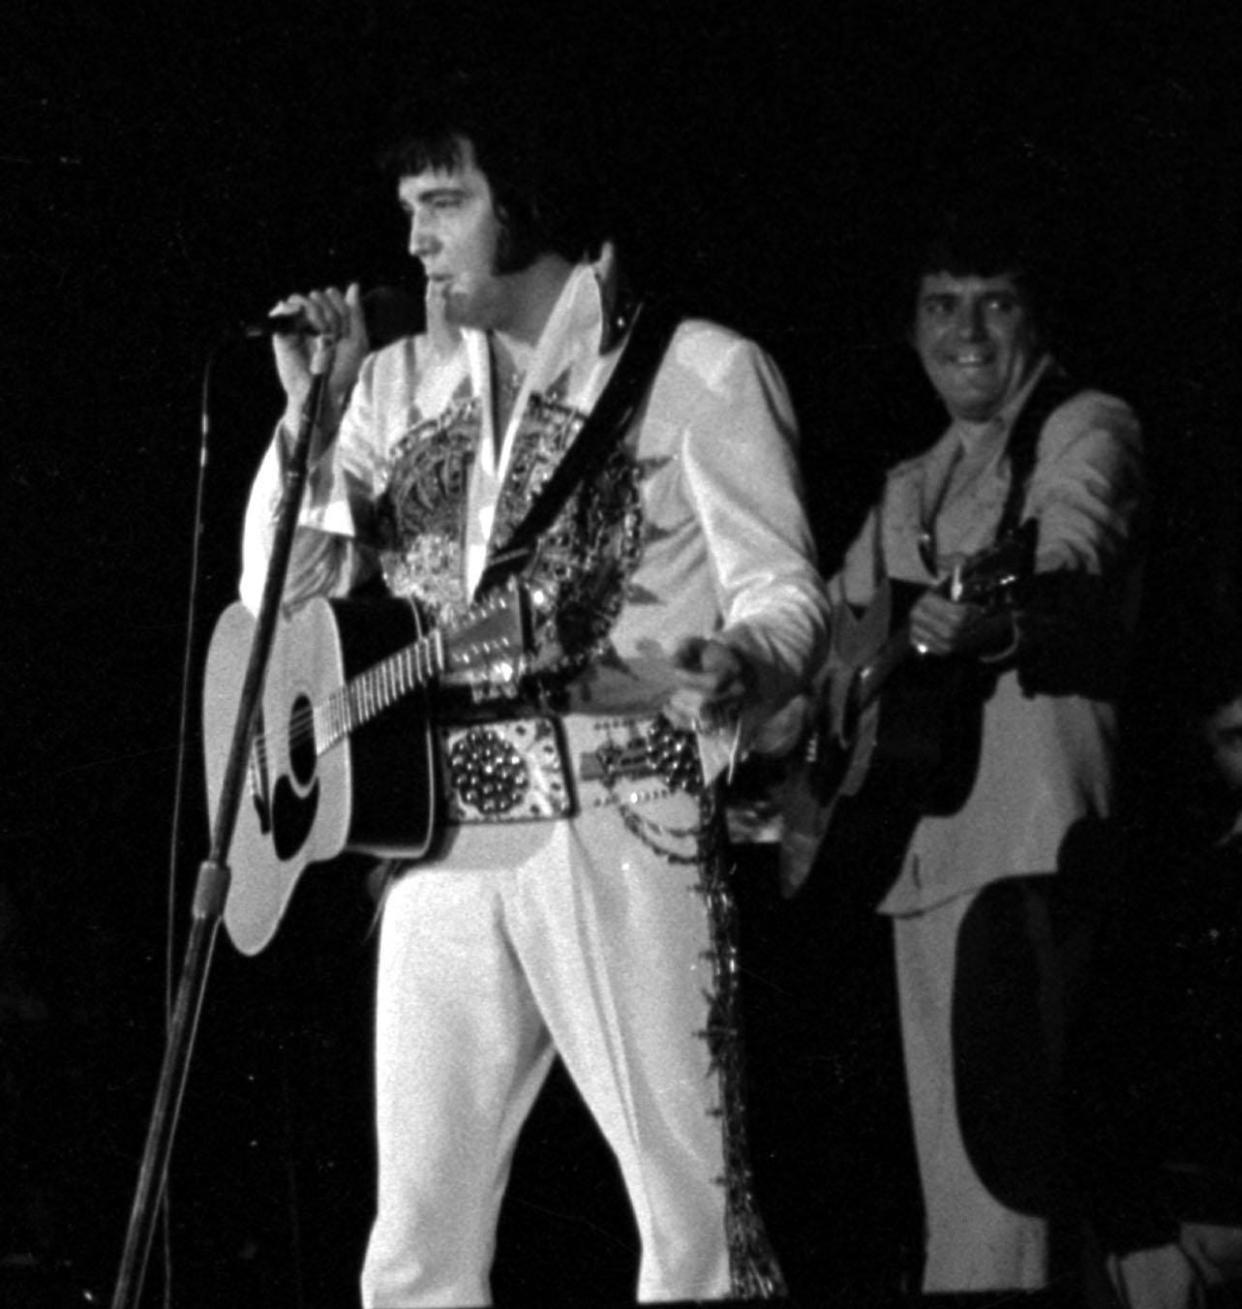 The King of Rock n' Roll Elvis Presley performed at the Rapides Parish Coliseum in March 1977. The "Louisiana Elvis Festival” will be Thursday through Saturday at the Coughlin-Saunders Performing Arts Center.